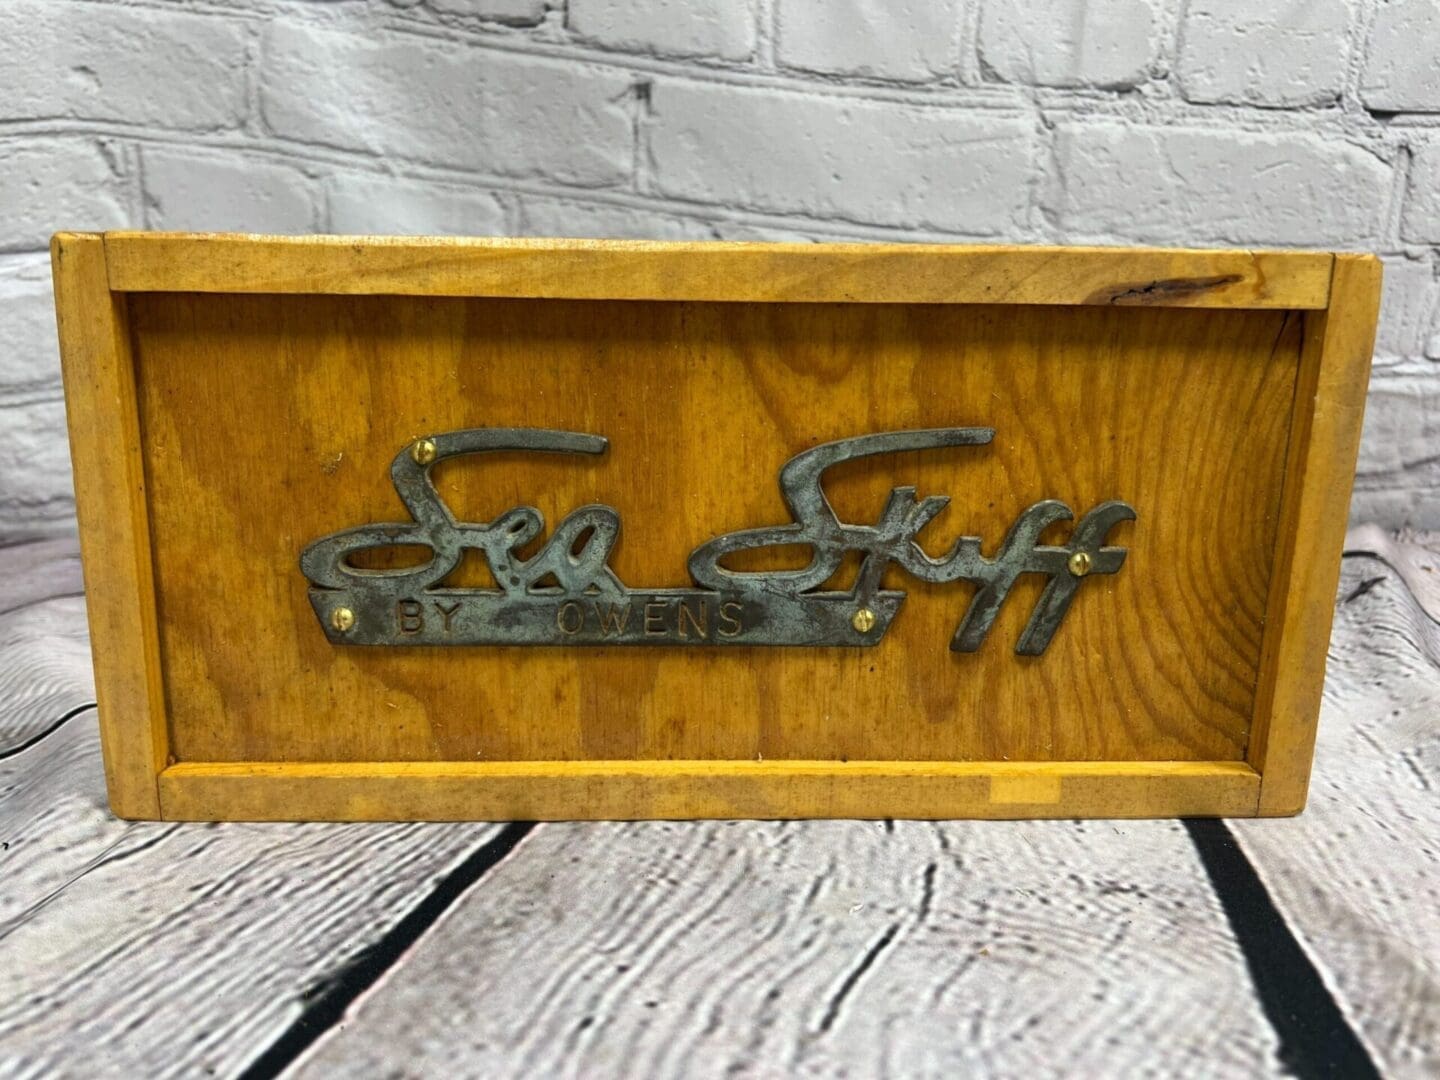 A wooden box with the name " sea stiff ".